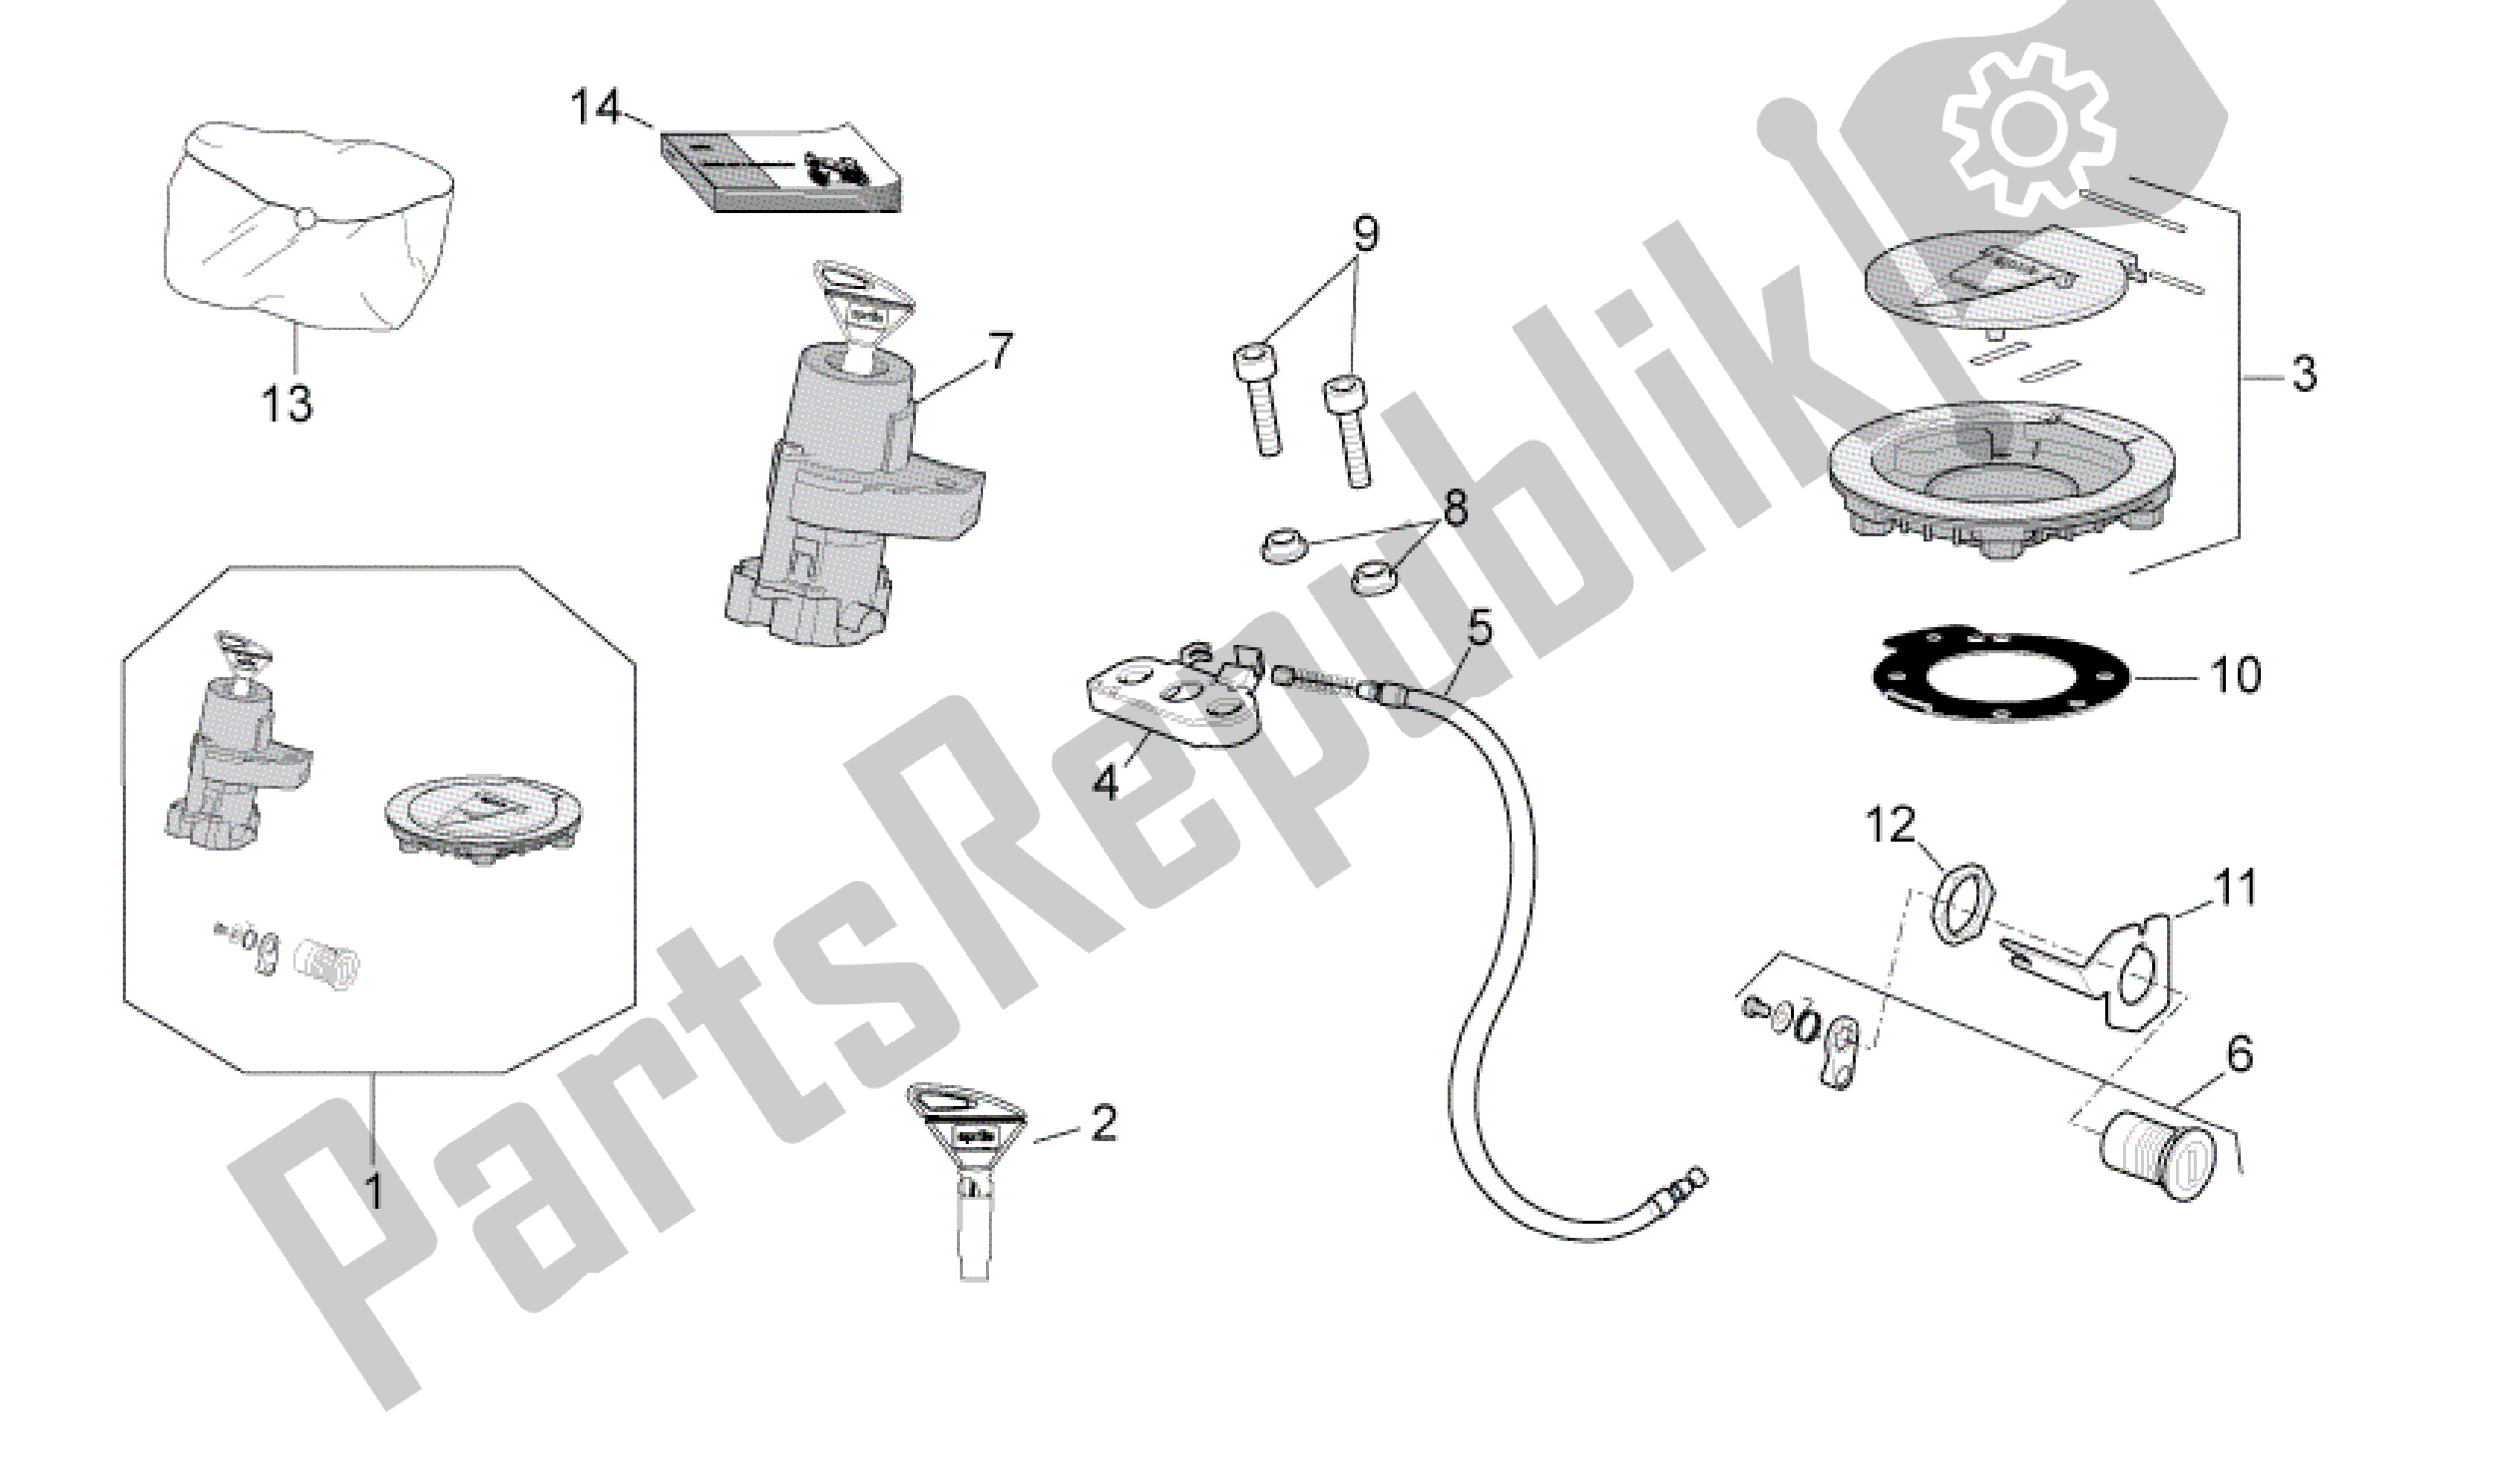 All parts for the Lock Hardware Kit of the Aprilia RSV4 Aprc R ABS 3984 1000 2013